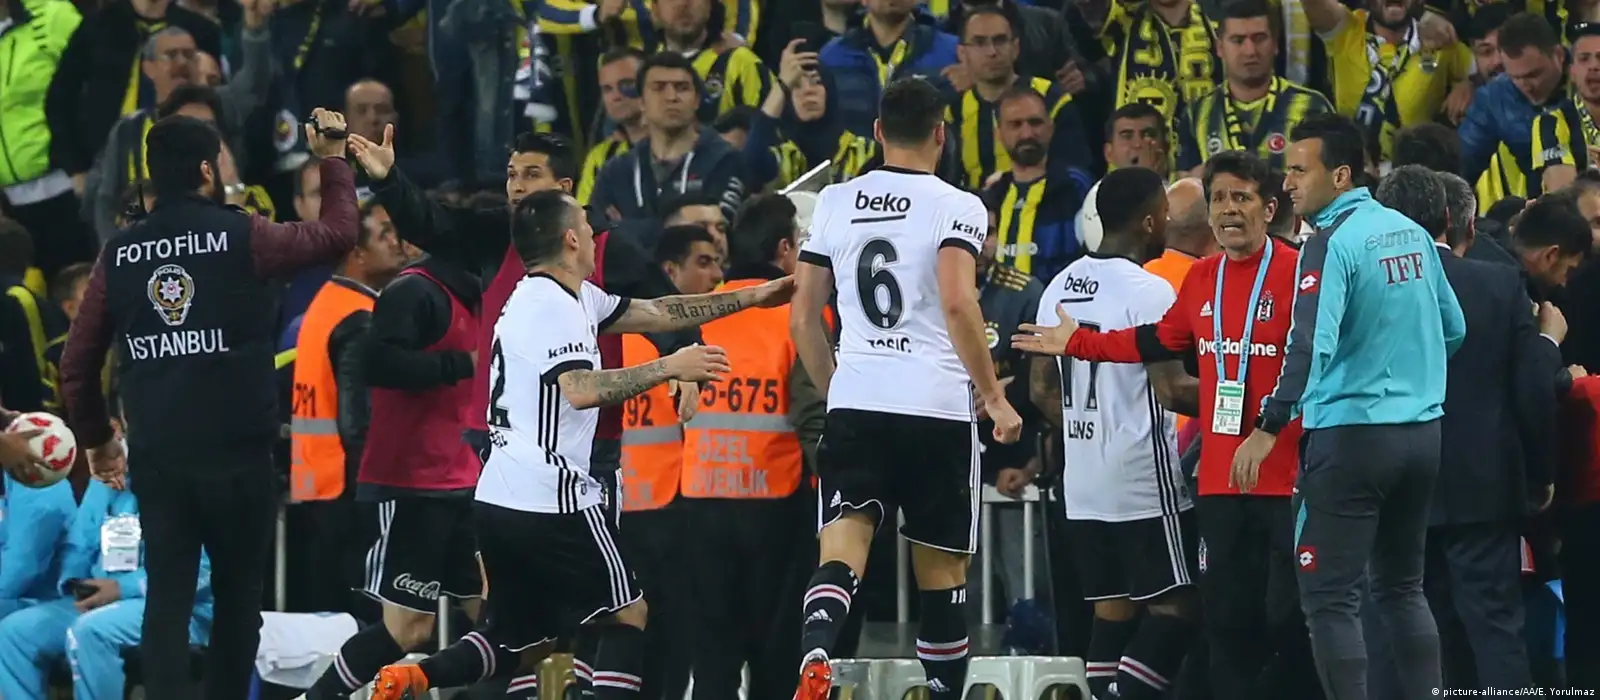 beIN SPORTS USA on X: 🤯 CONTROVERSY! 🚨 This happened before the 2nd goal  of Besiktas. Should this have been a yellow or red card? 🤔 🍿 Watch  Besiktas vs Galatasaray 🇹🇷 #